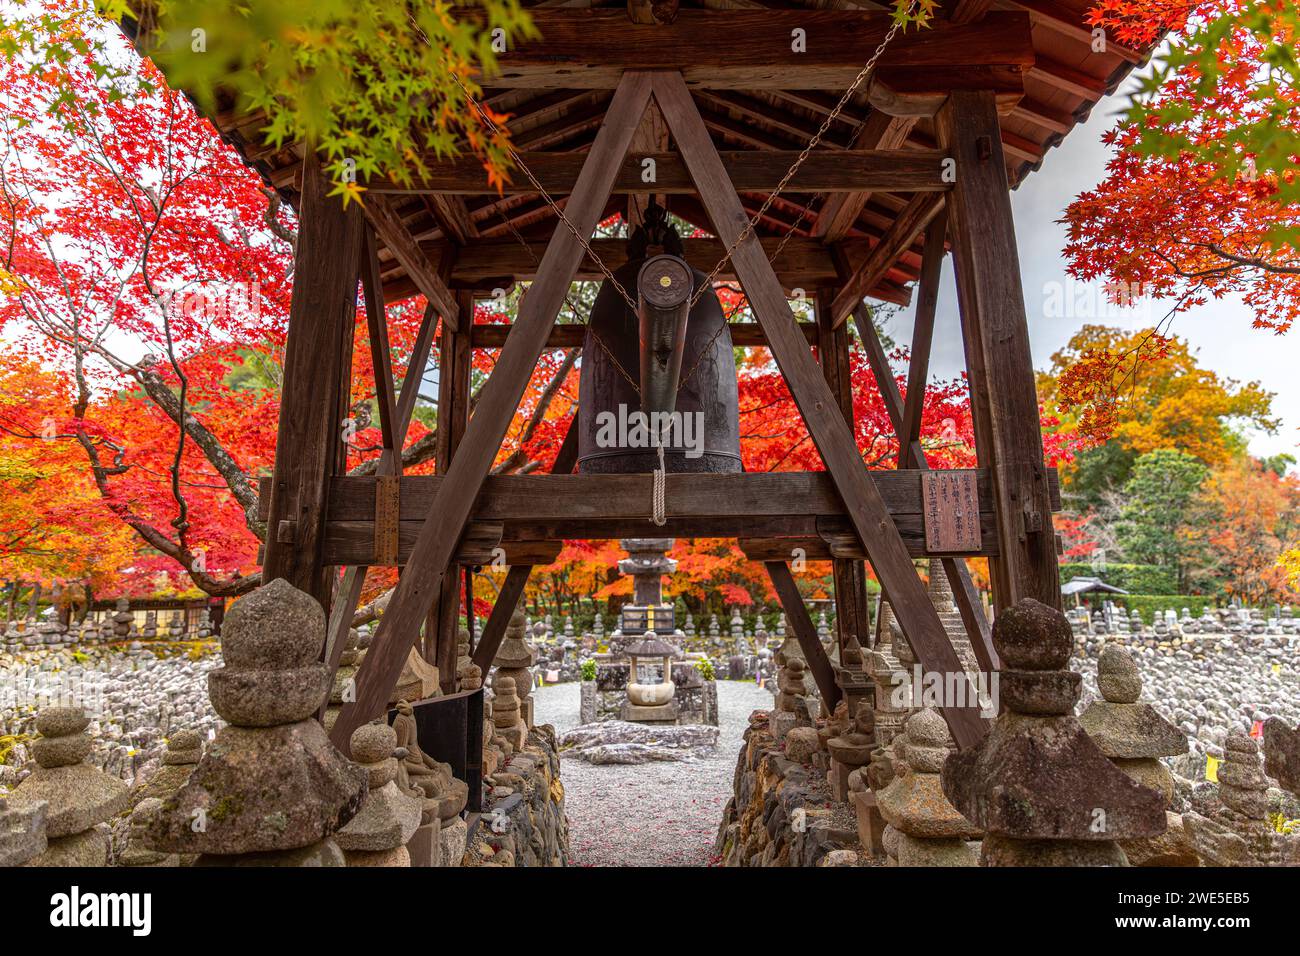 detail of the bell in the Adashino Nenbutsuji temple in Kyoto Stock Photo